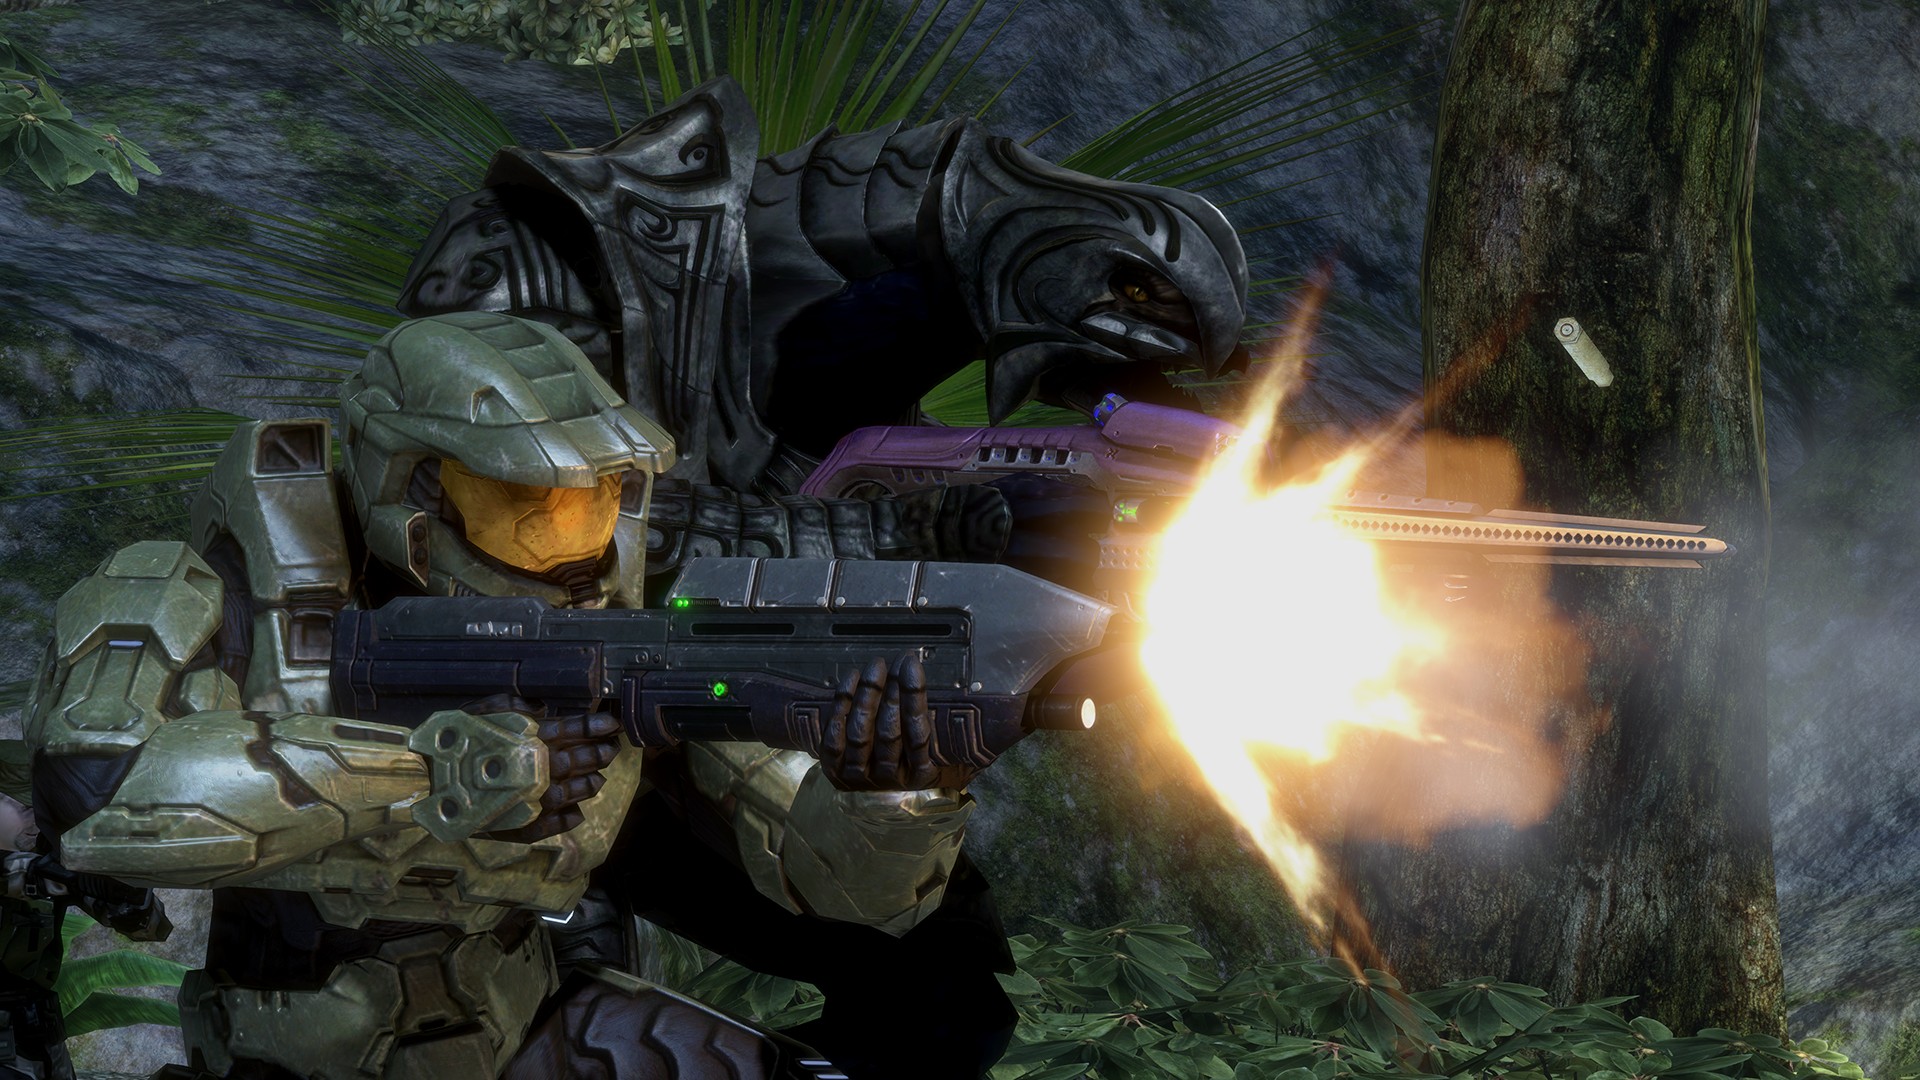 Halo: Combat Evolved Anniversary is now available on PC